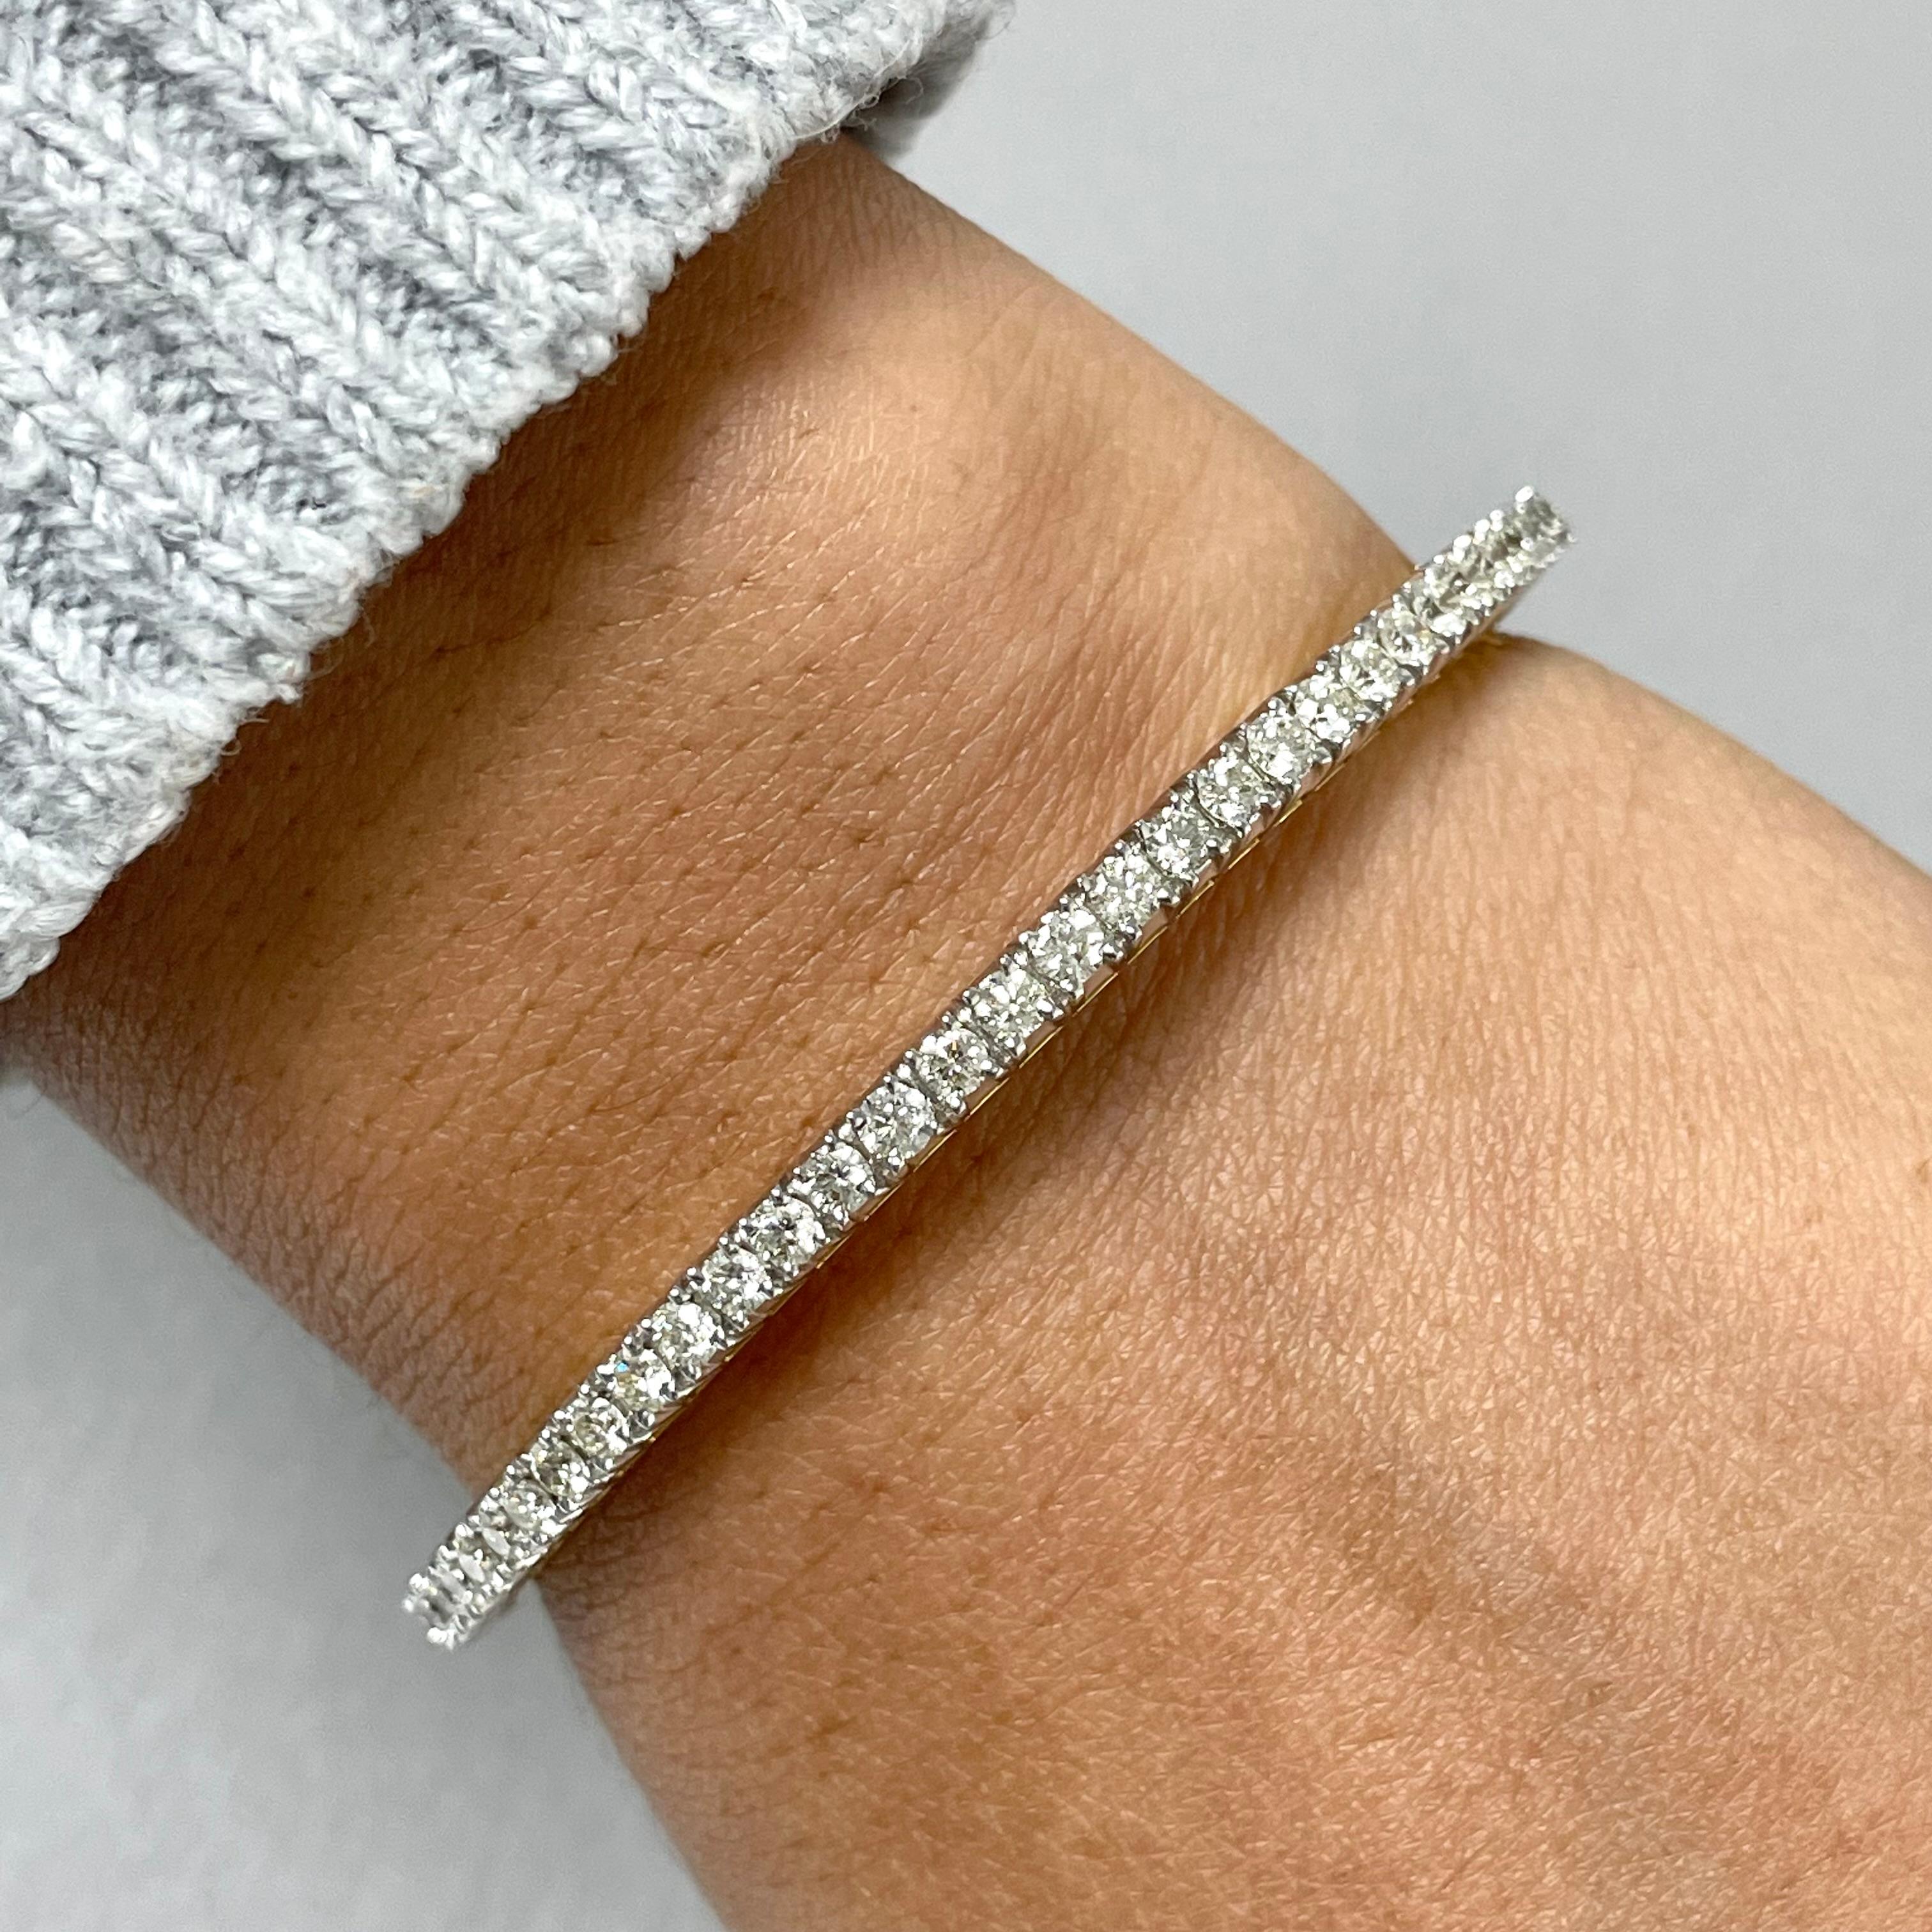 The Classic & Evergreen Bangle that delicately accentuates the wrist. This bangle is open-able for ease of putting on and taking off. 

Total Diamond Weight: 5.03 ct 
No. of Diamonds: 72 
Average Diamond Weight: 0.07 ct 
Diamond Color: H 
Diamond